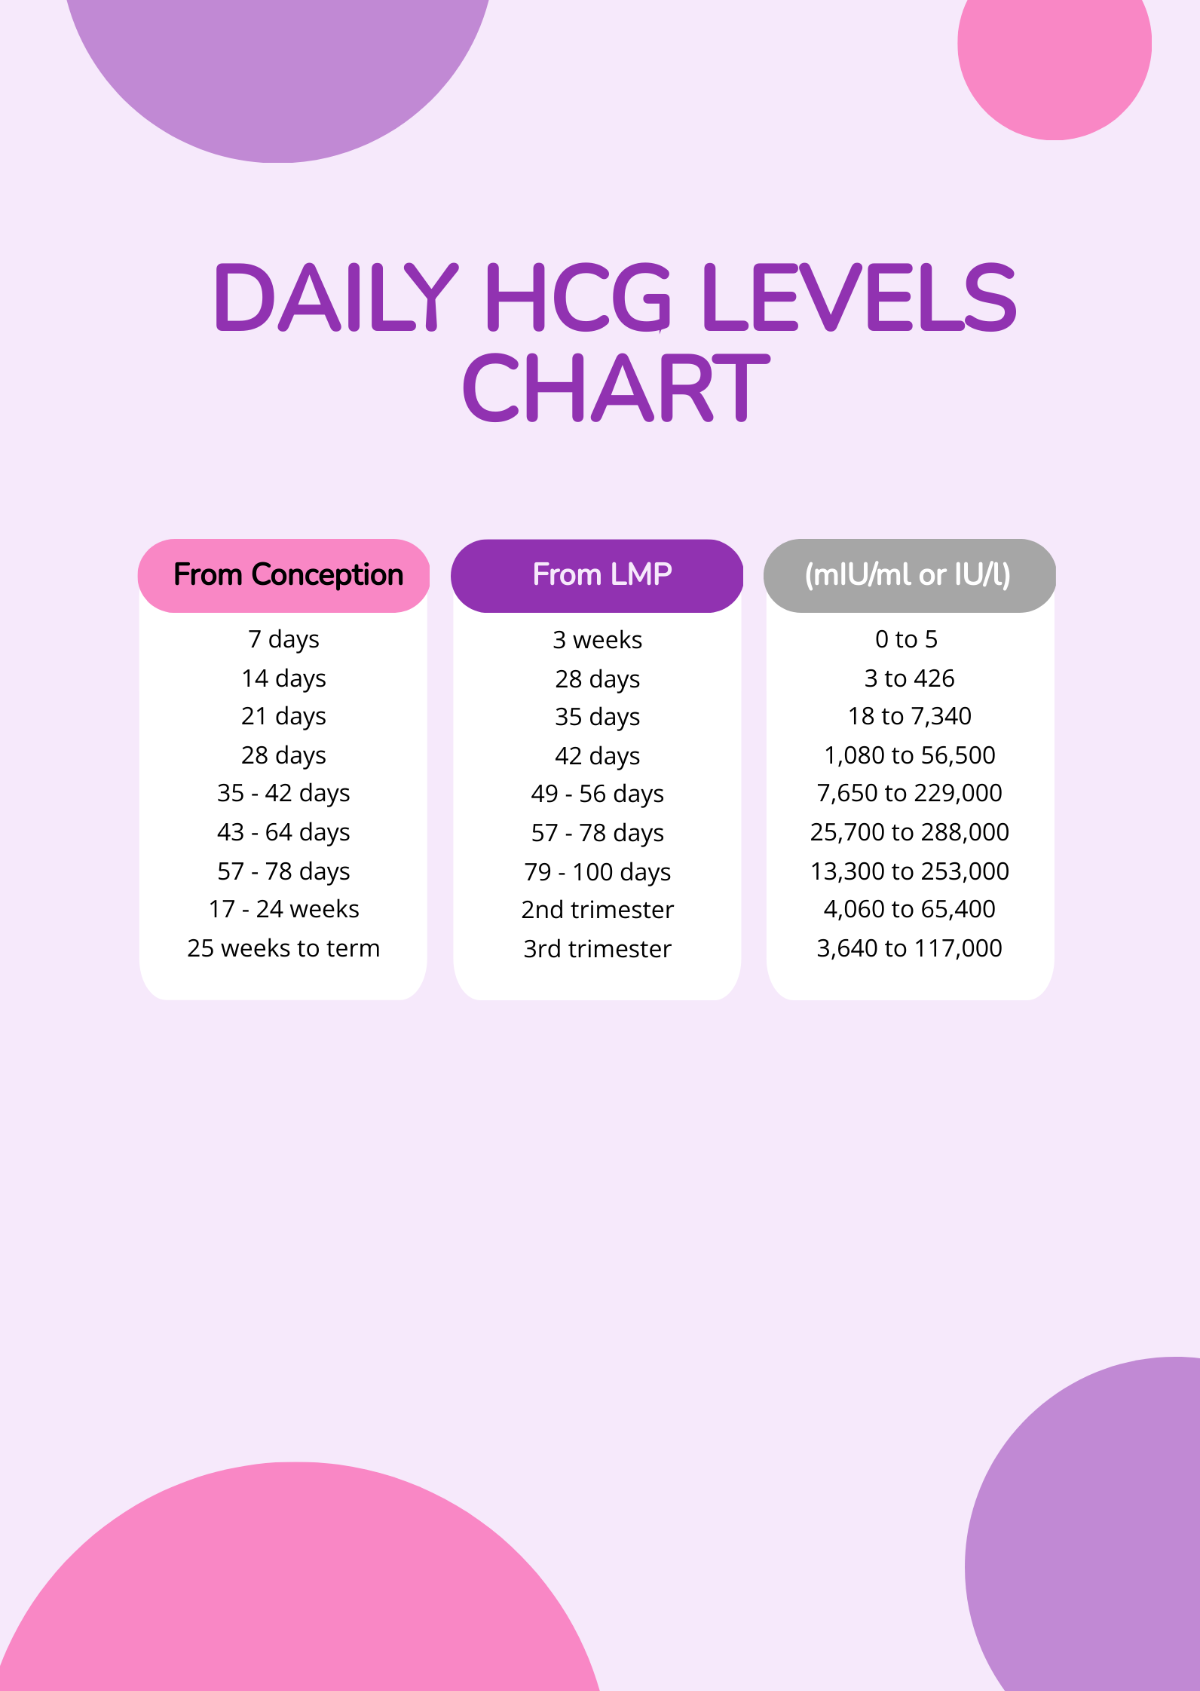 Daily HCG Levels Chart